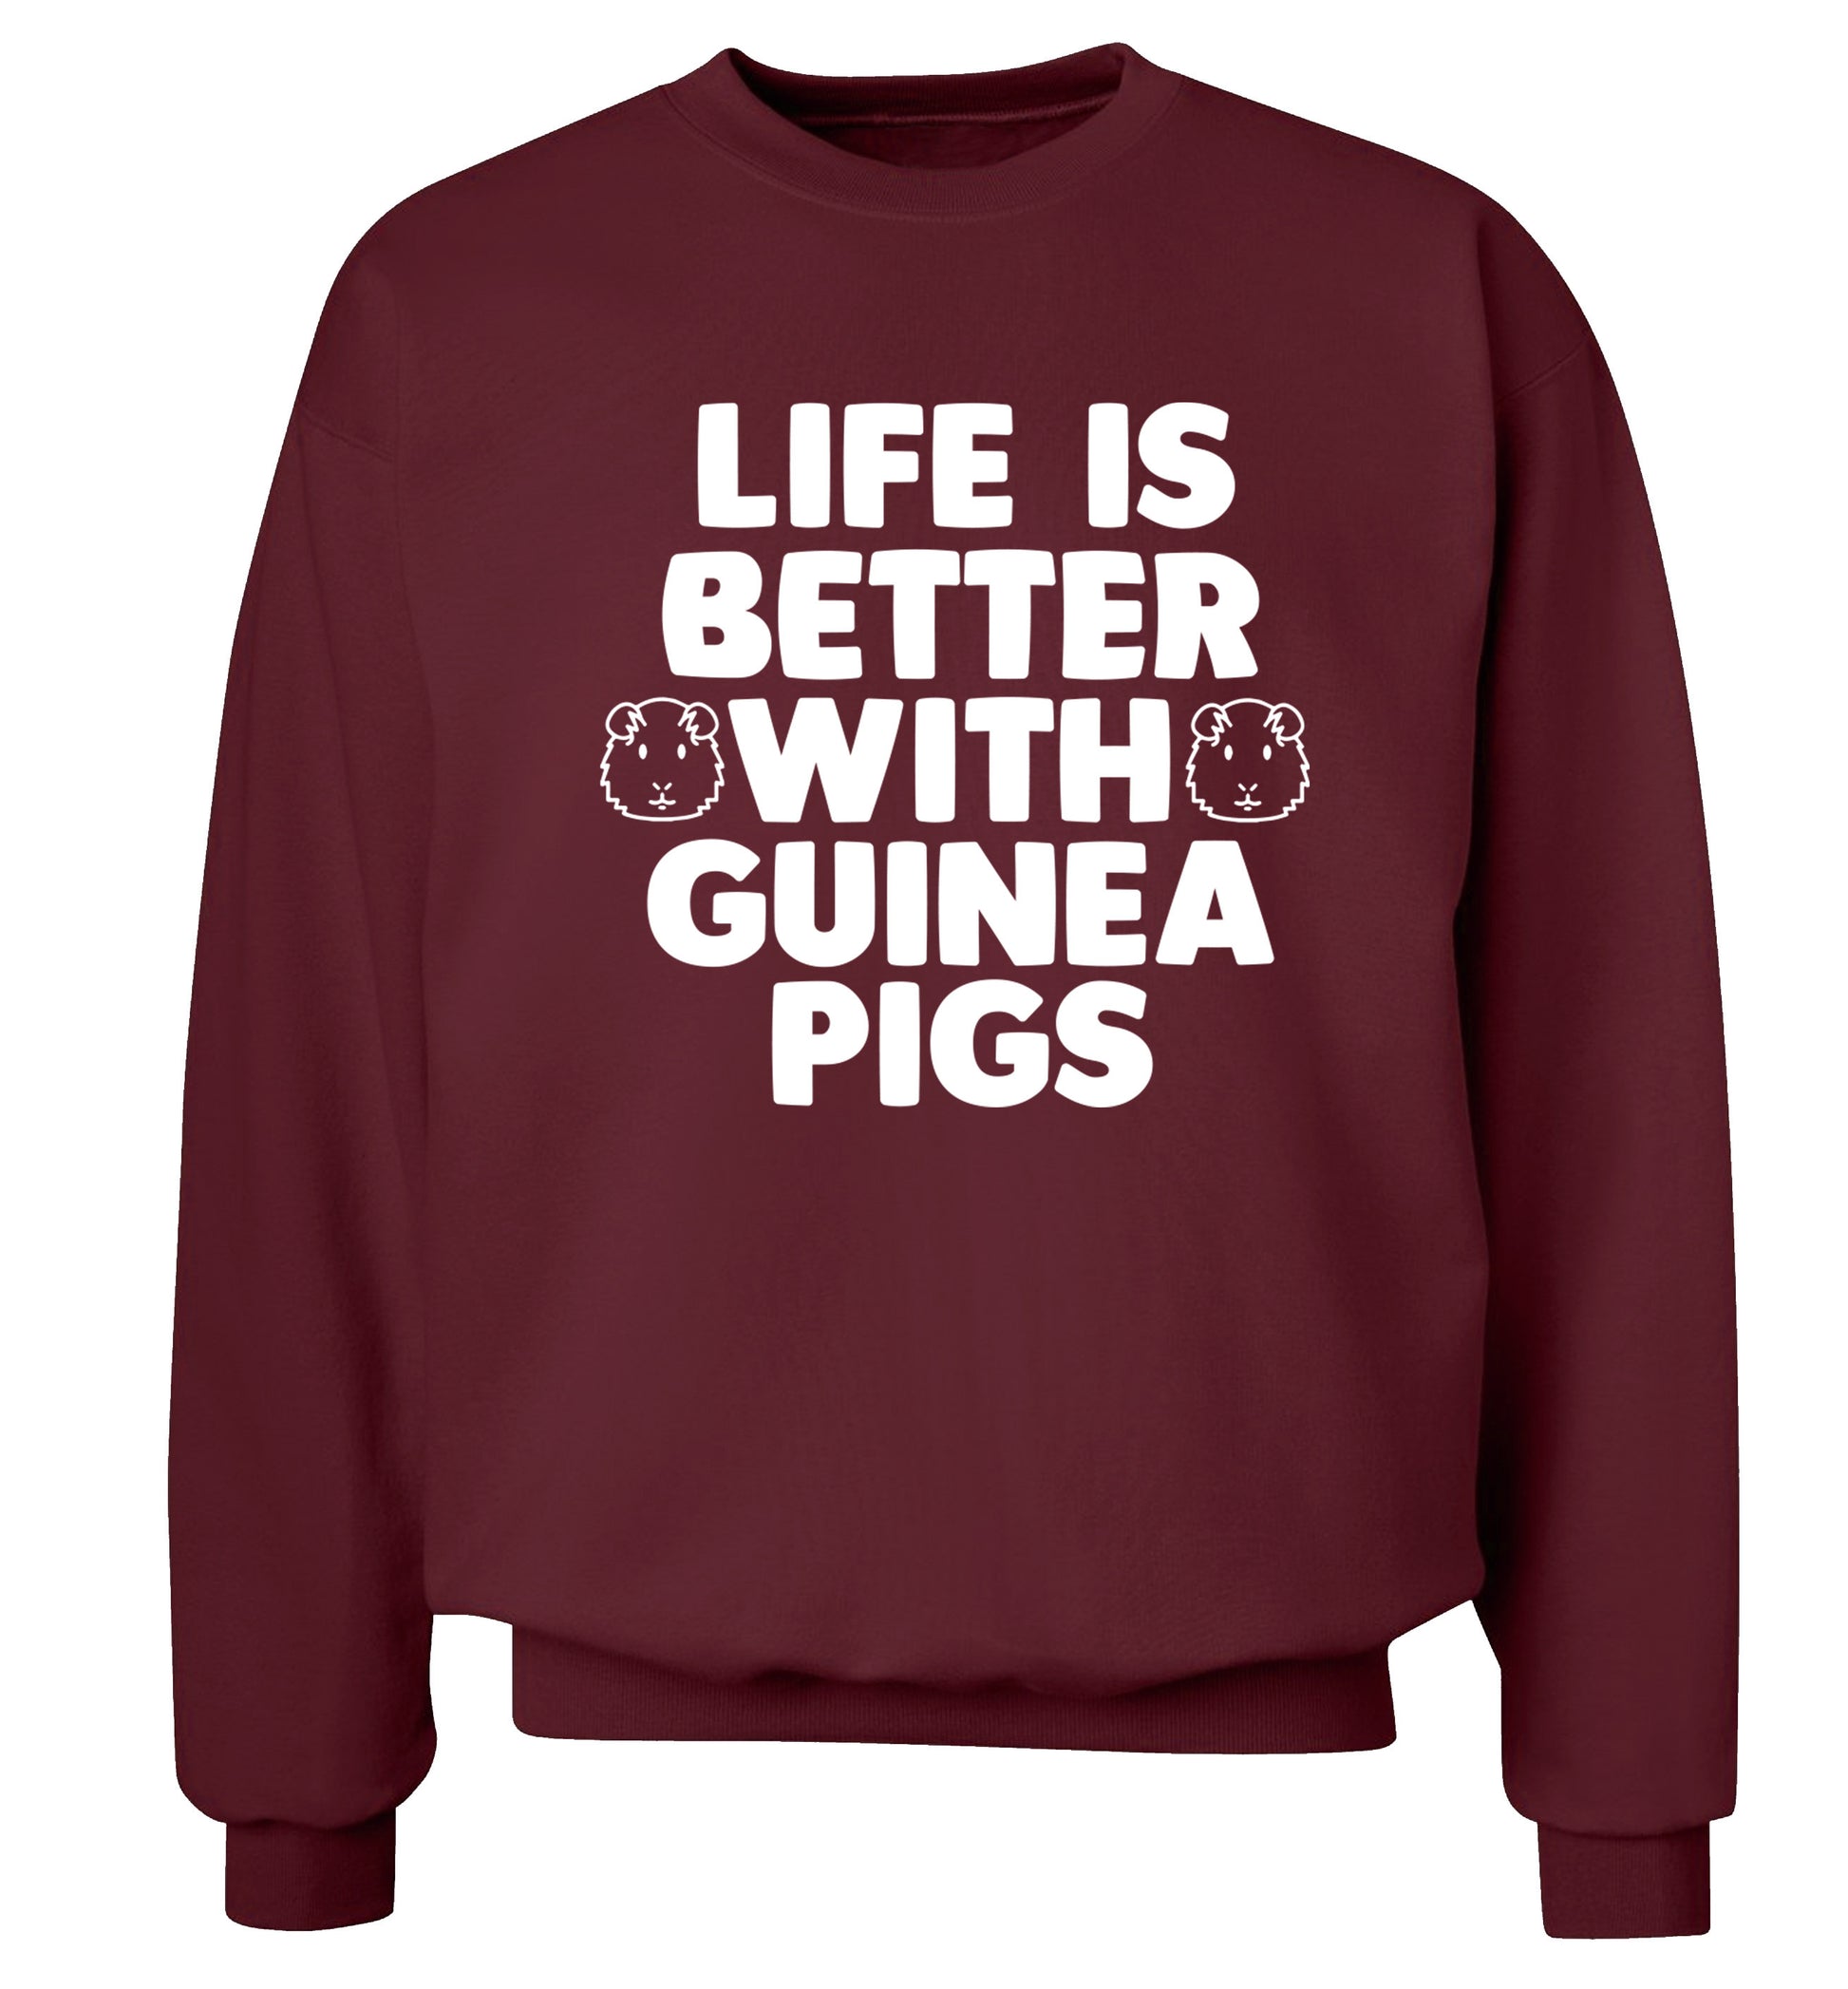 Life is better with guinea pigs Adult's unisex maroon  sweater 2XL